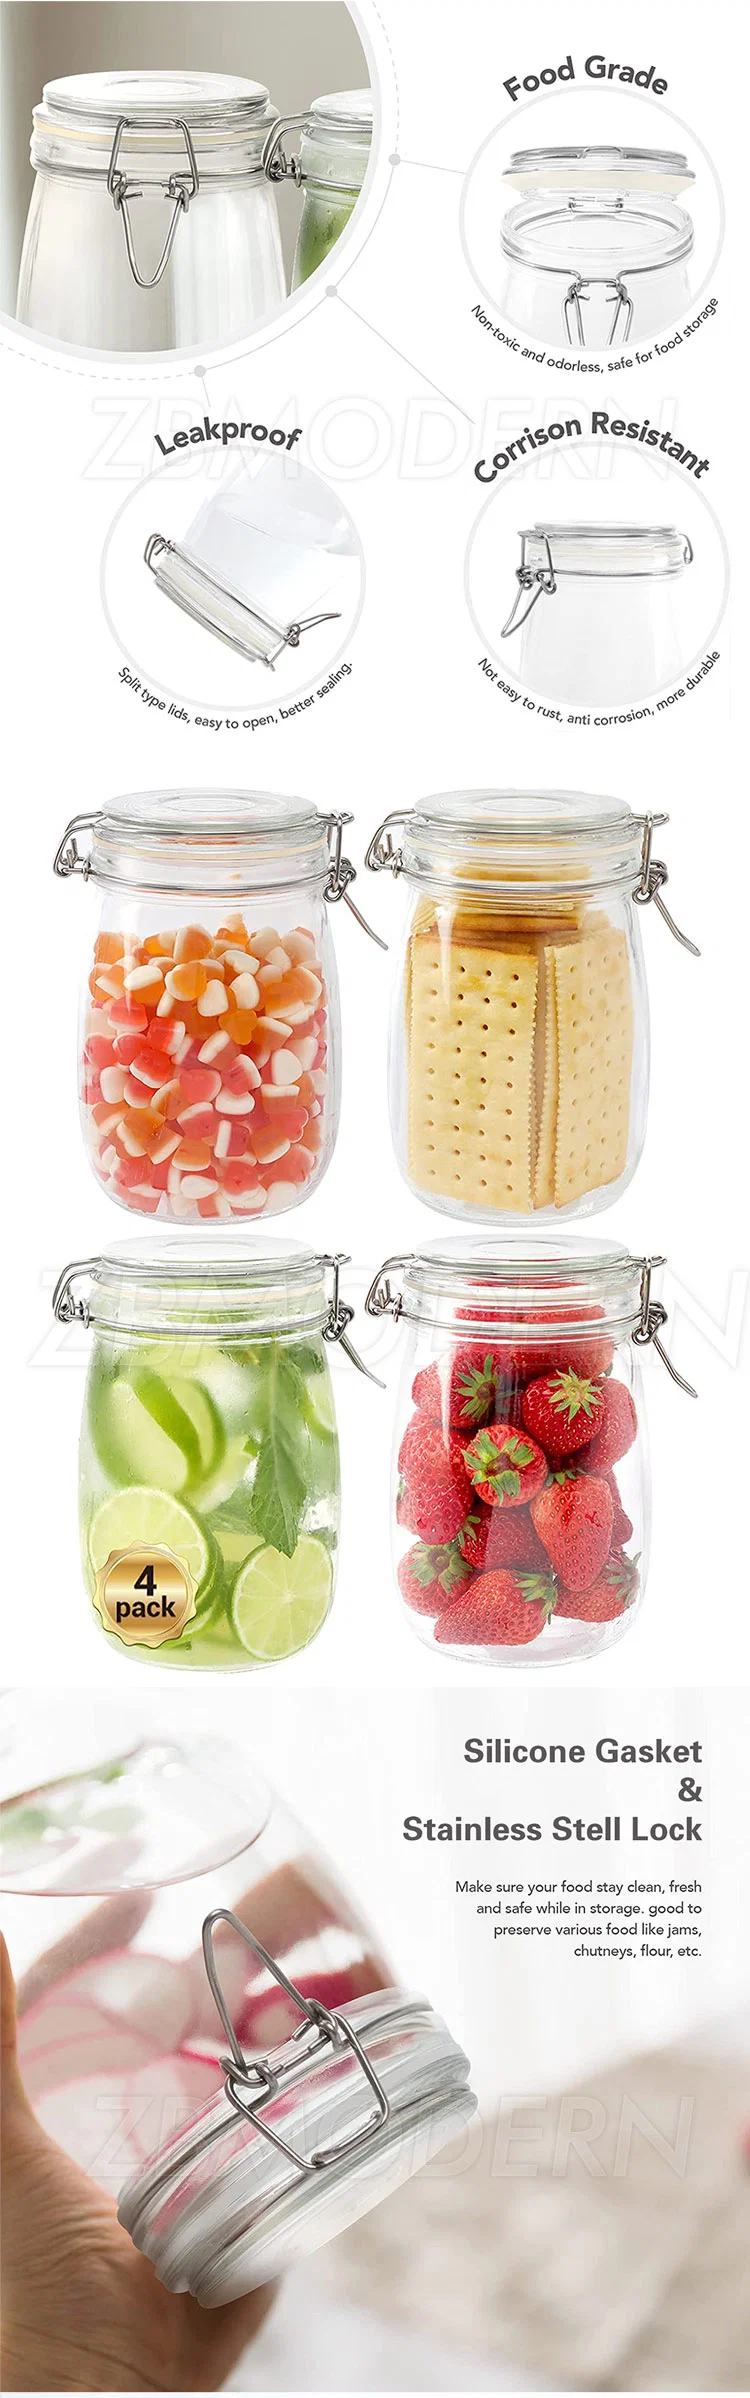 32oz Glass Jars with Airtight Lids, 4 Pack Glass Storage Jars with Clamp Lids, Kitchen Canister for Food and Pantry